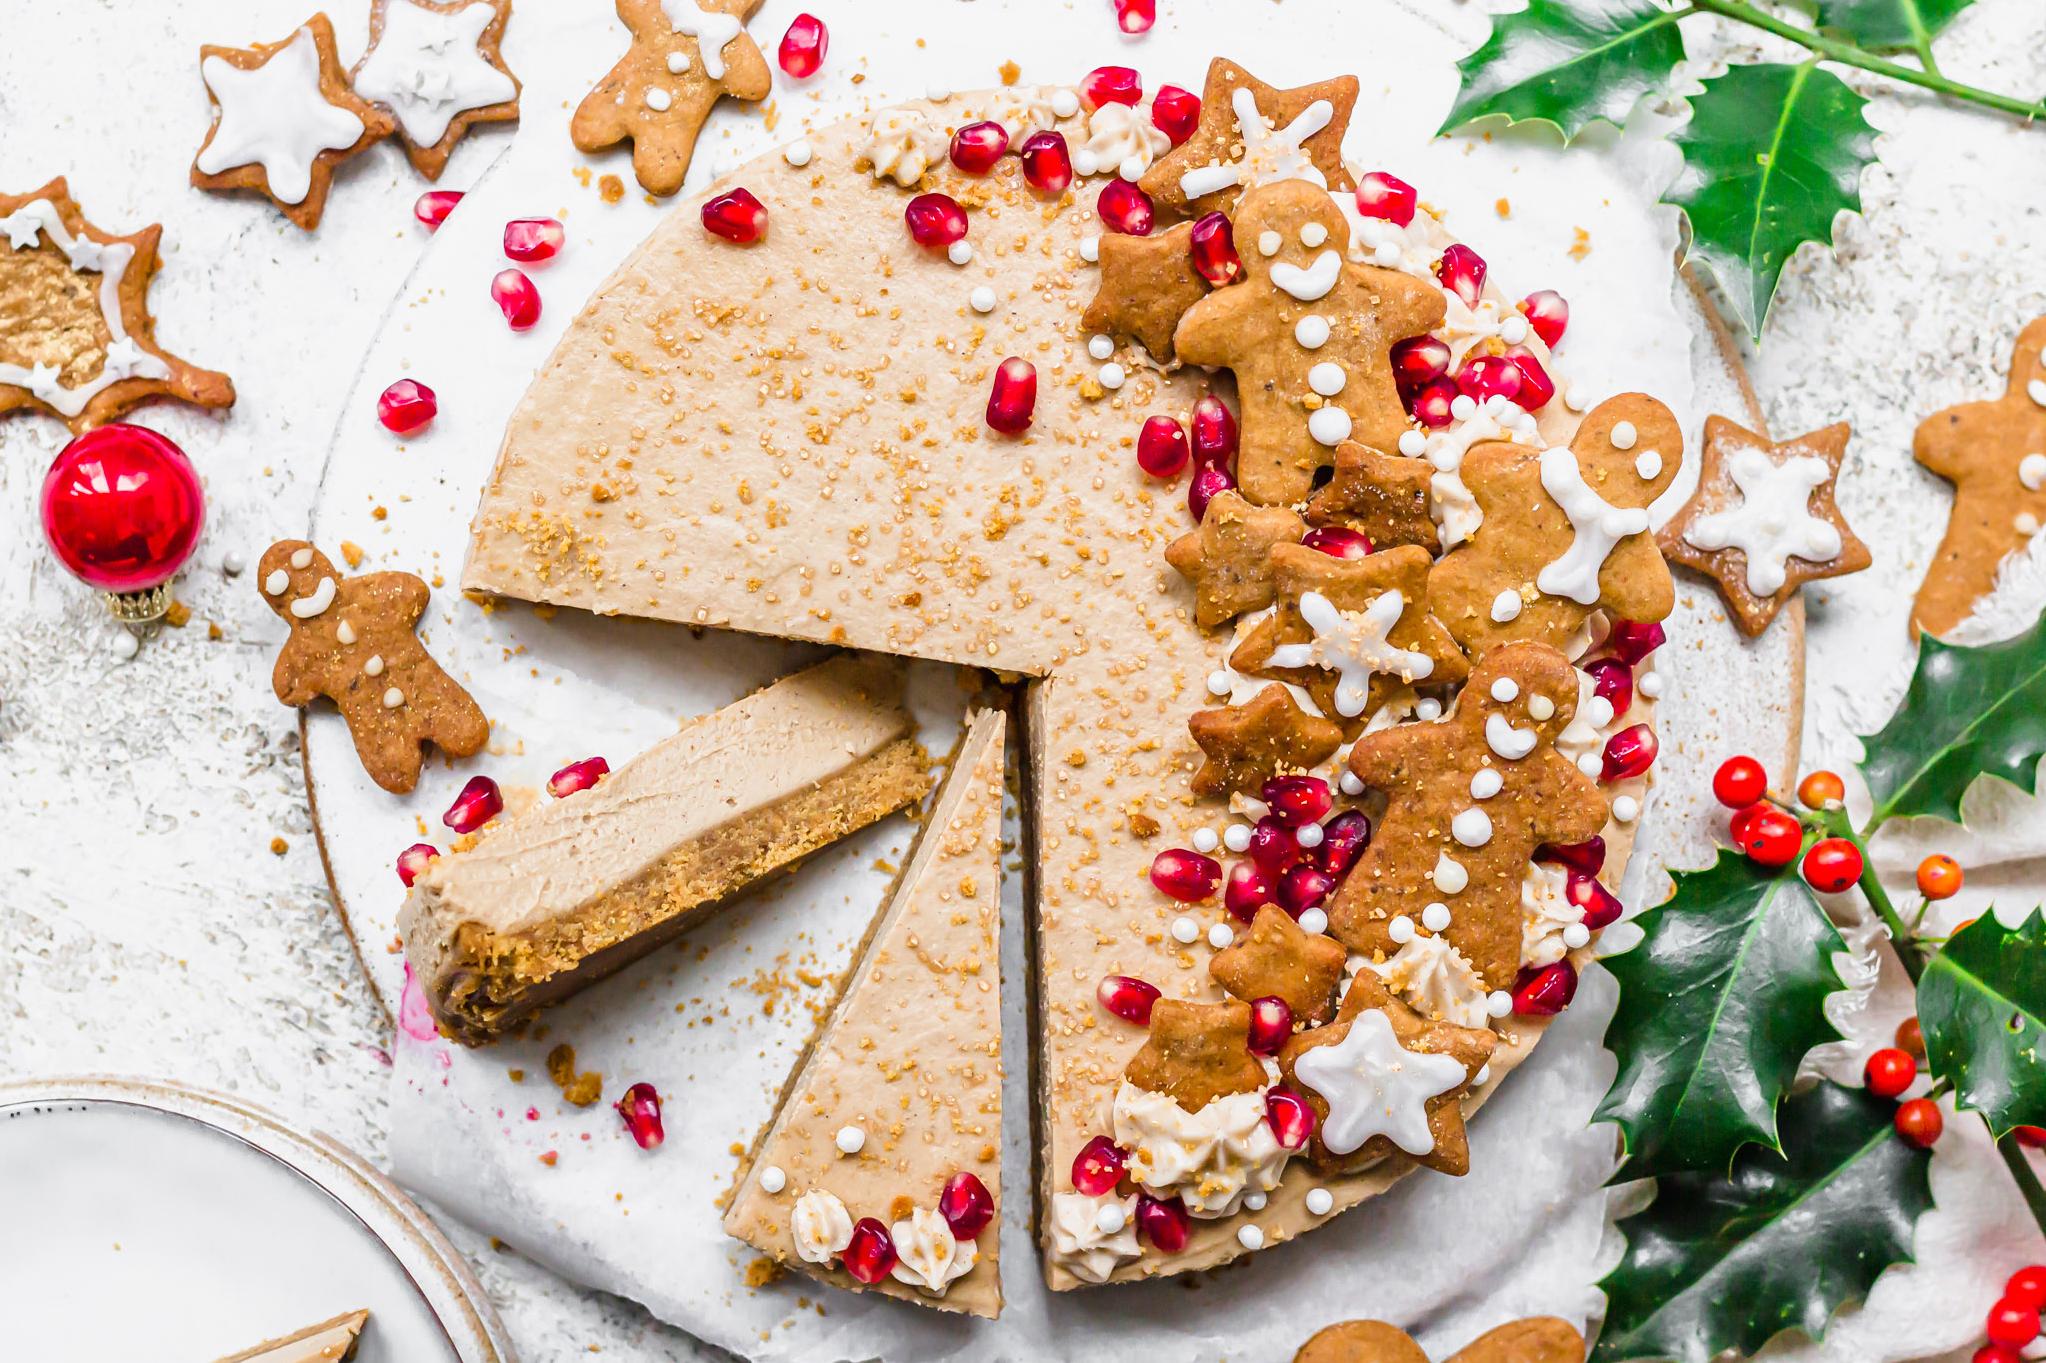  The perfect combination of spicy and sweet: gluten-free gingerbread cheesecake with a warm gingerbread crust.